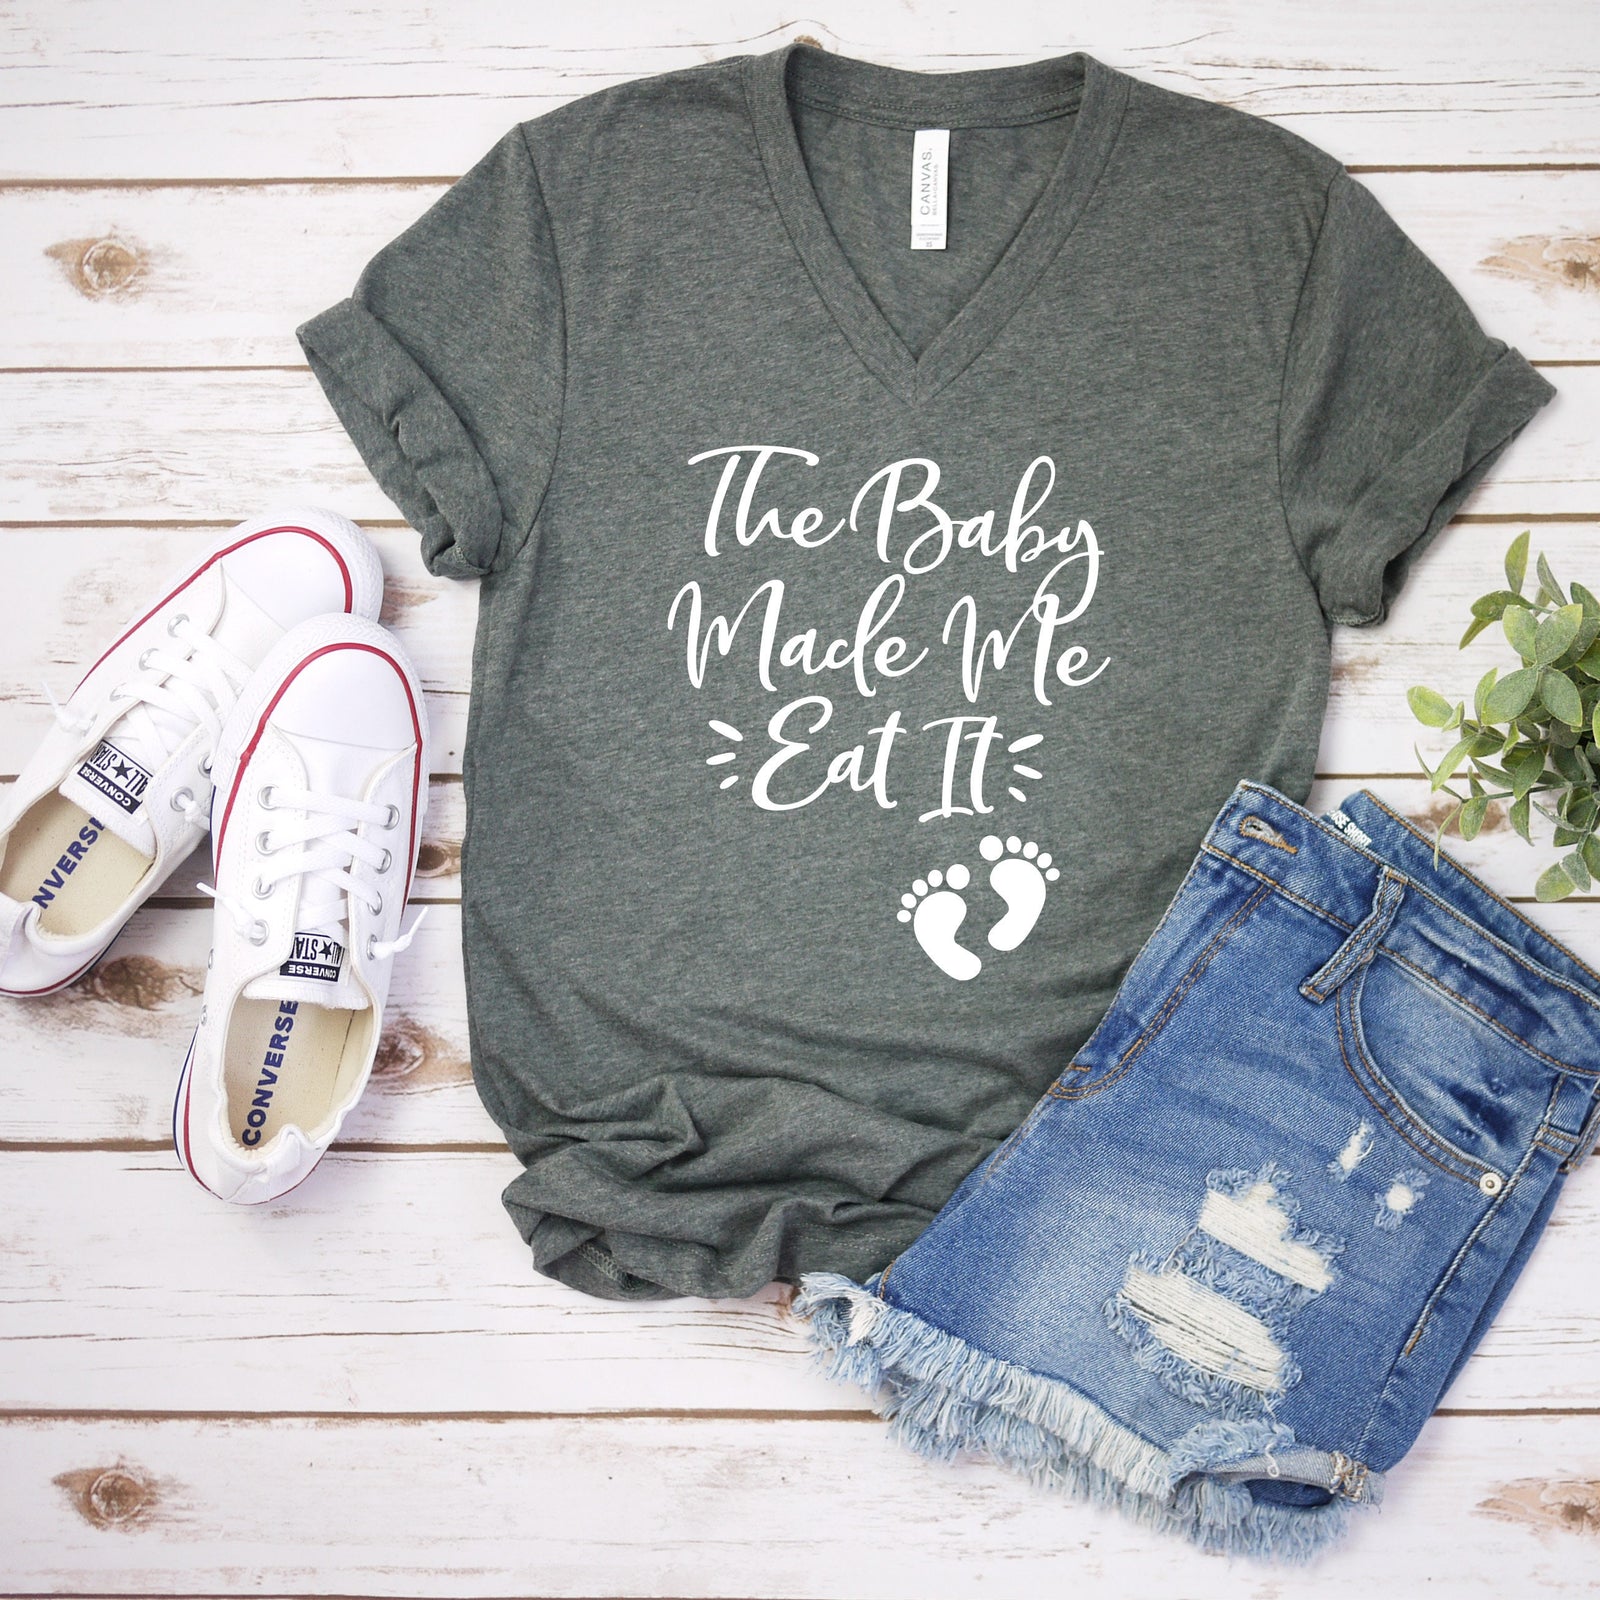 The Baby Made Me Eat It T Shirt - Mom Shirts - Mom Life - Funny Mommy to Be Shirt - Pregnant - Maternity